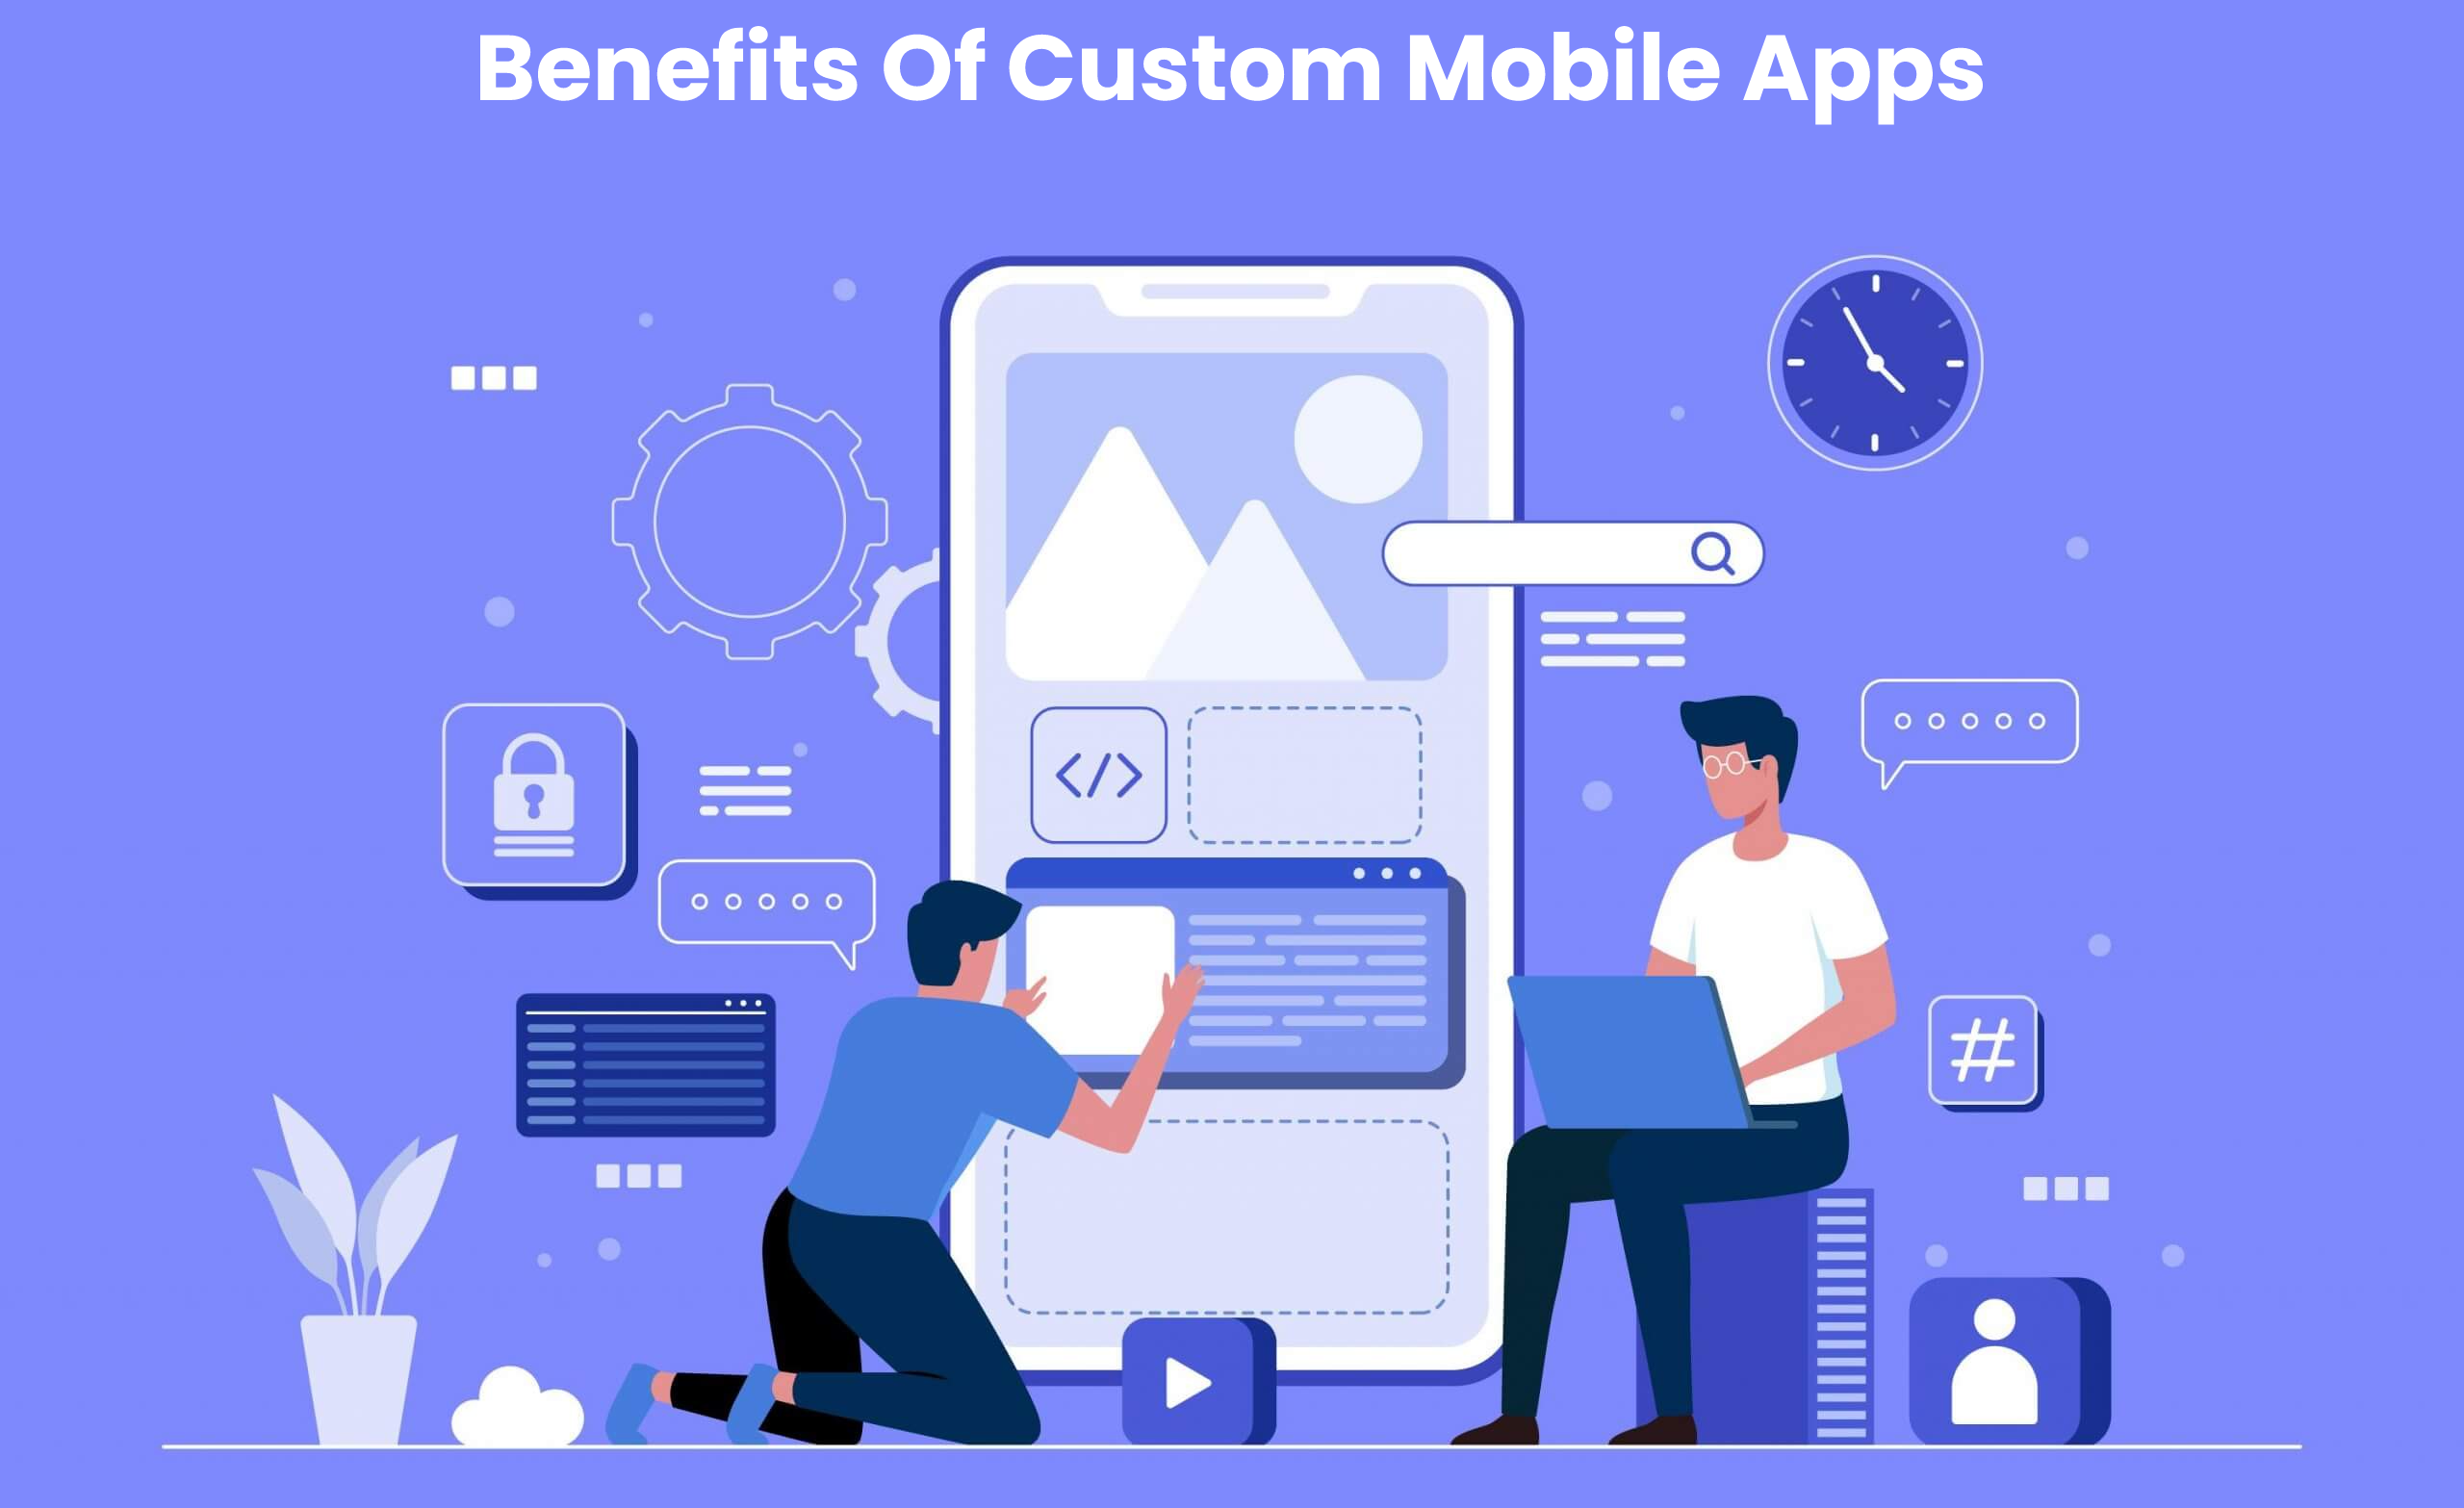 What Are The Benefits Of Custom Mobile Apps